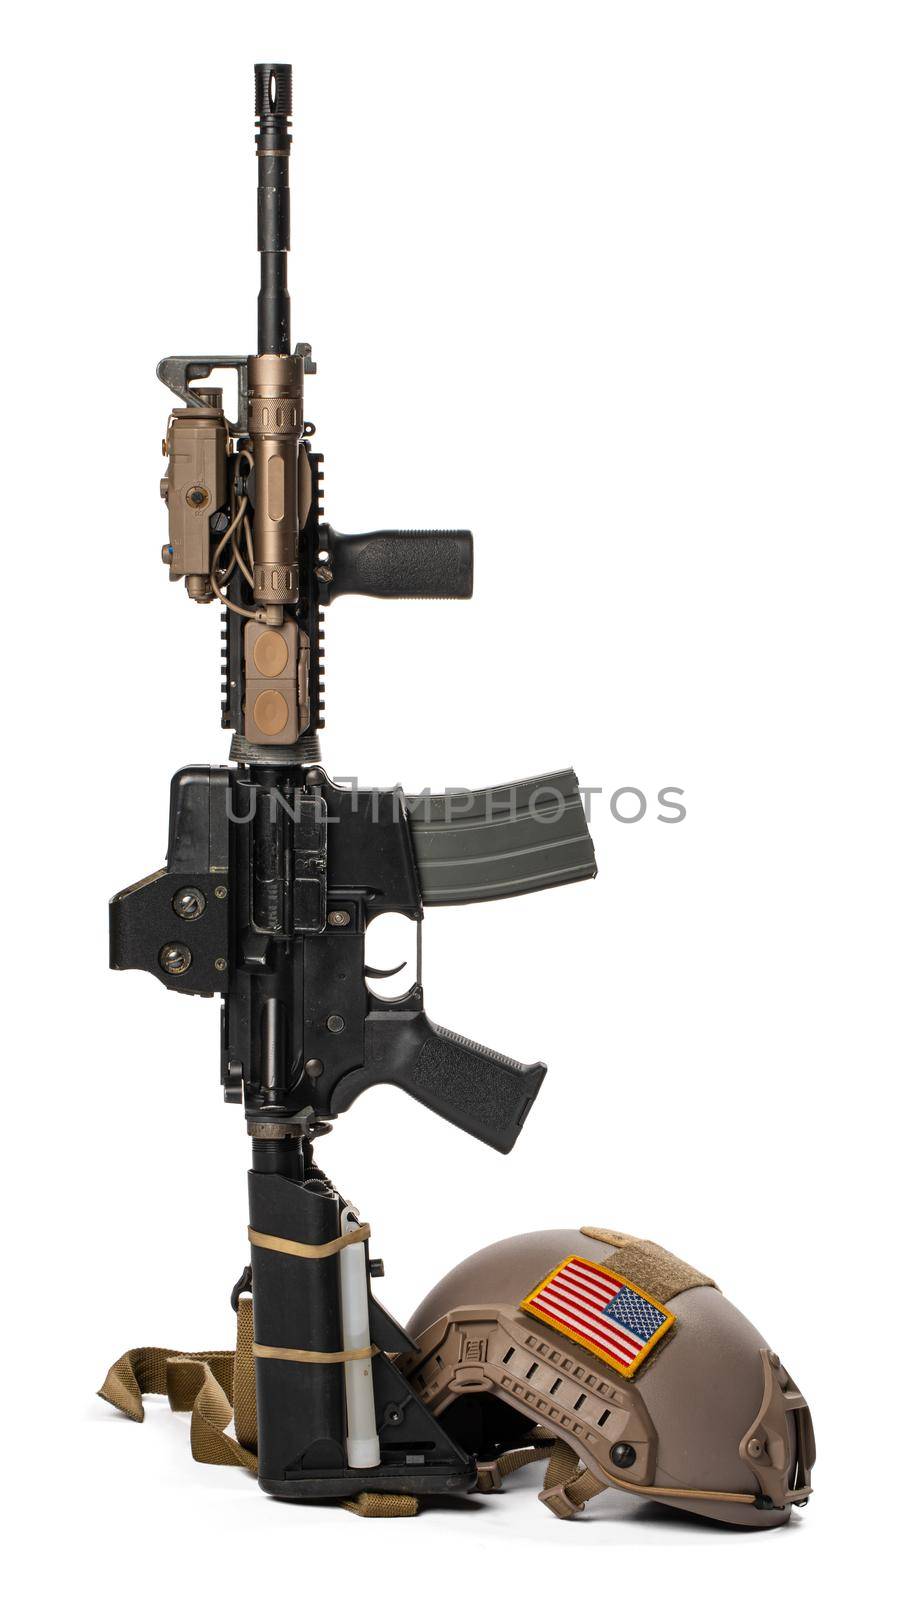 Military toy airsoft rifle isolated on white background by Fabrikasimf